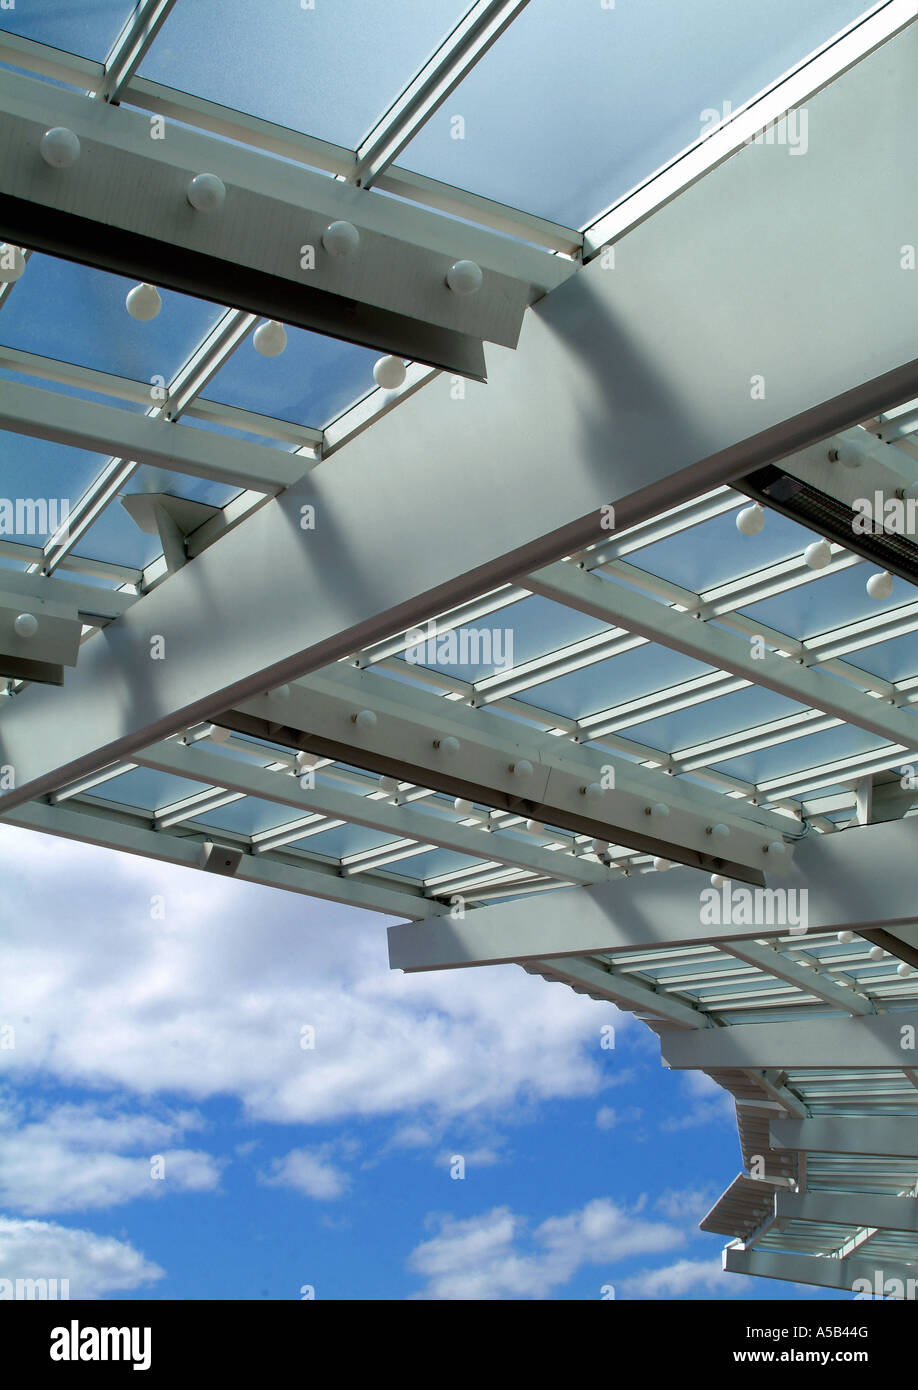 Futuristic roof overhang. Stock Photo